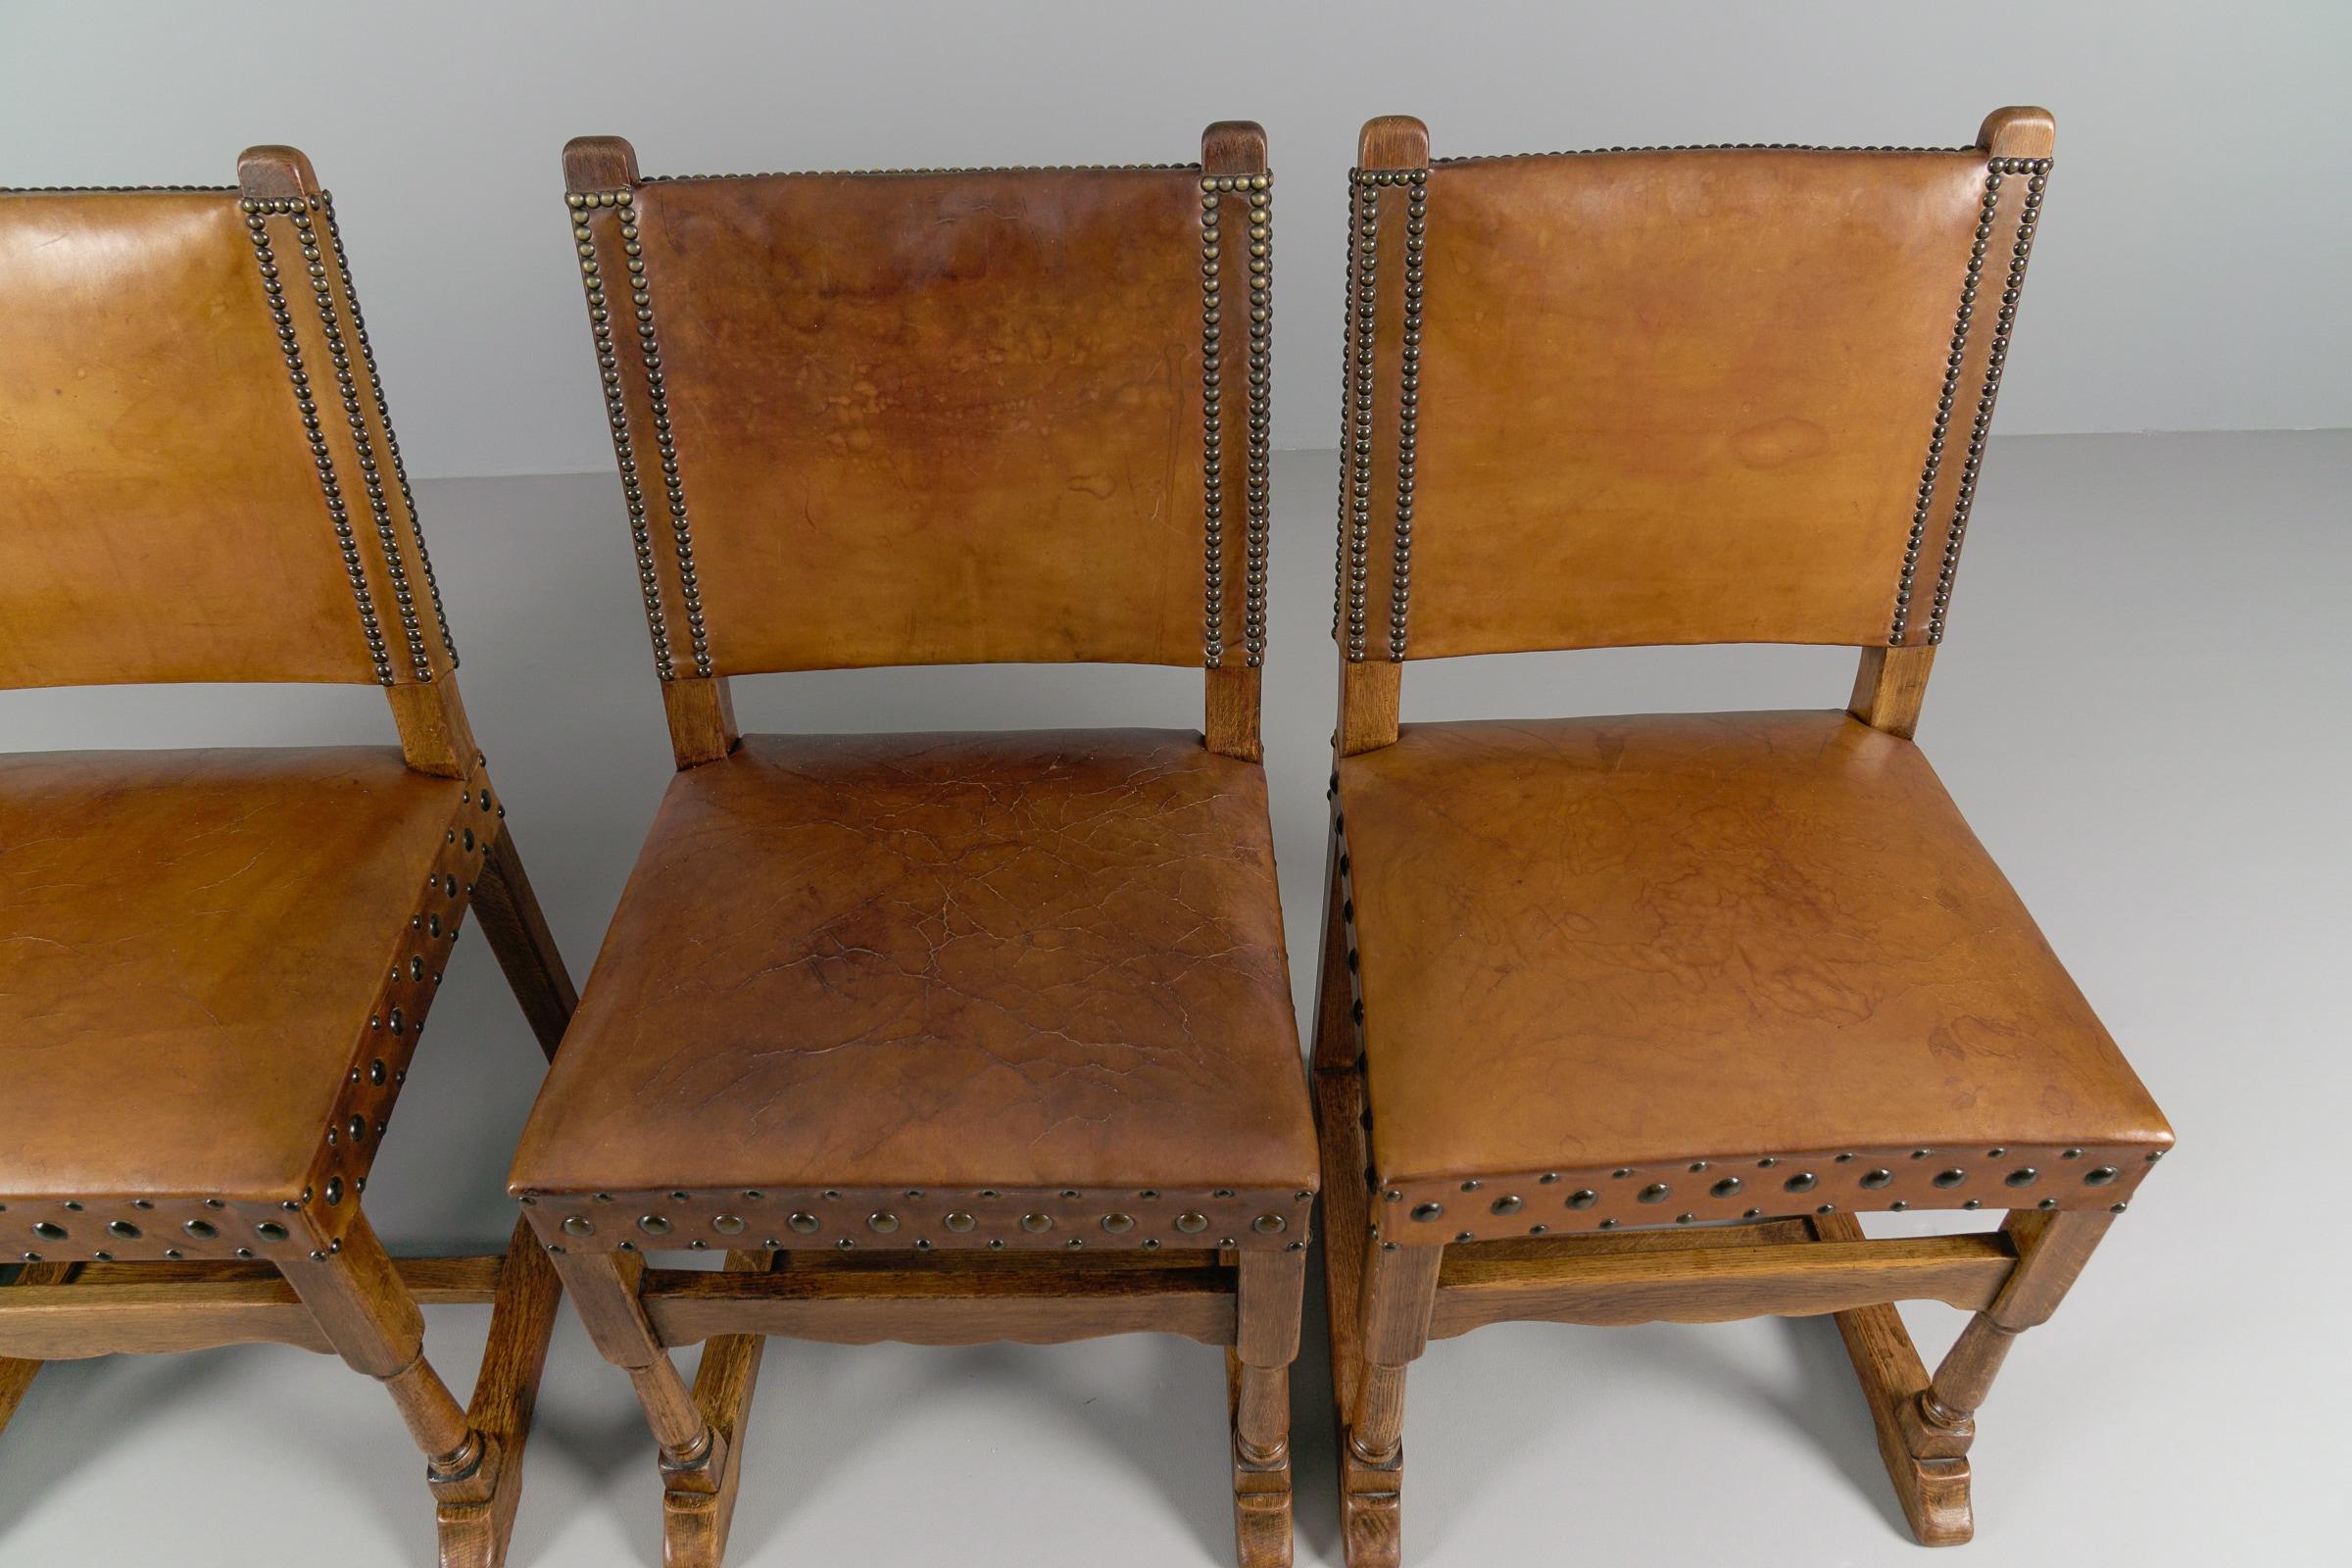  Spanish Leather and Wood Chairs, 1940s, Set of 4 For Sale 3